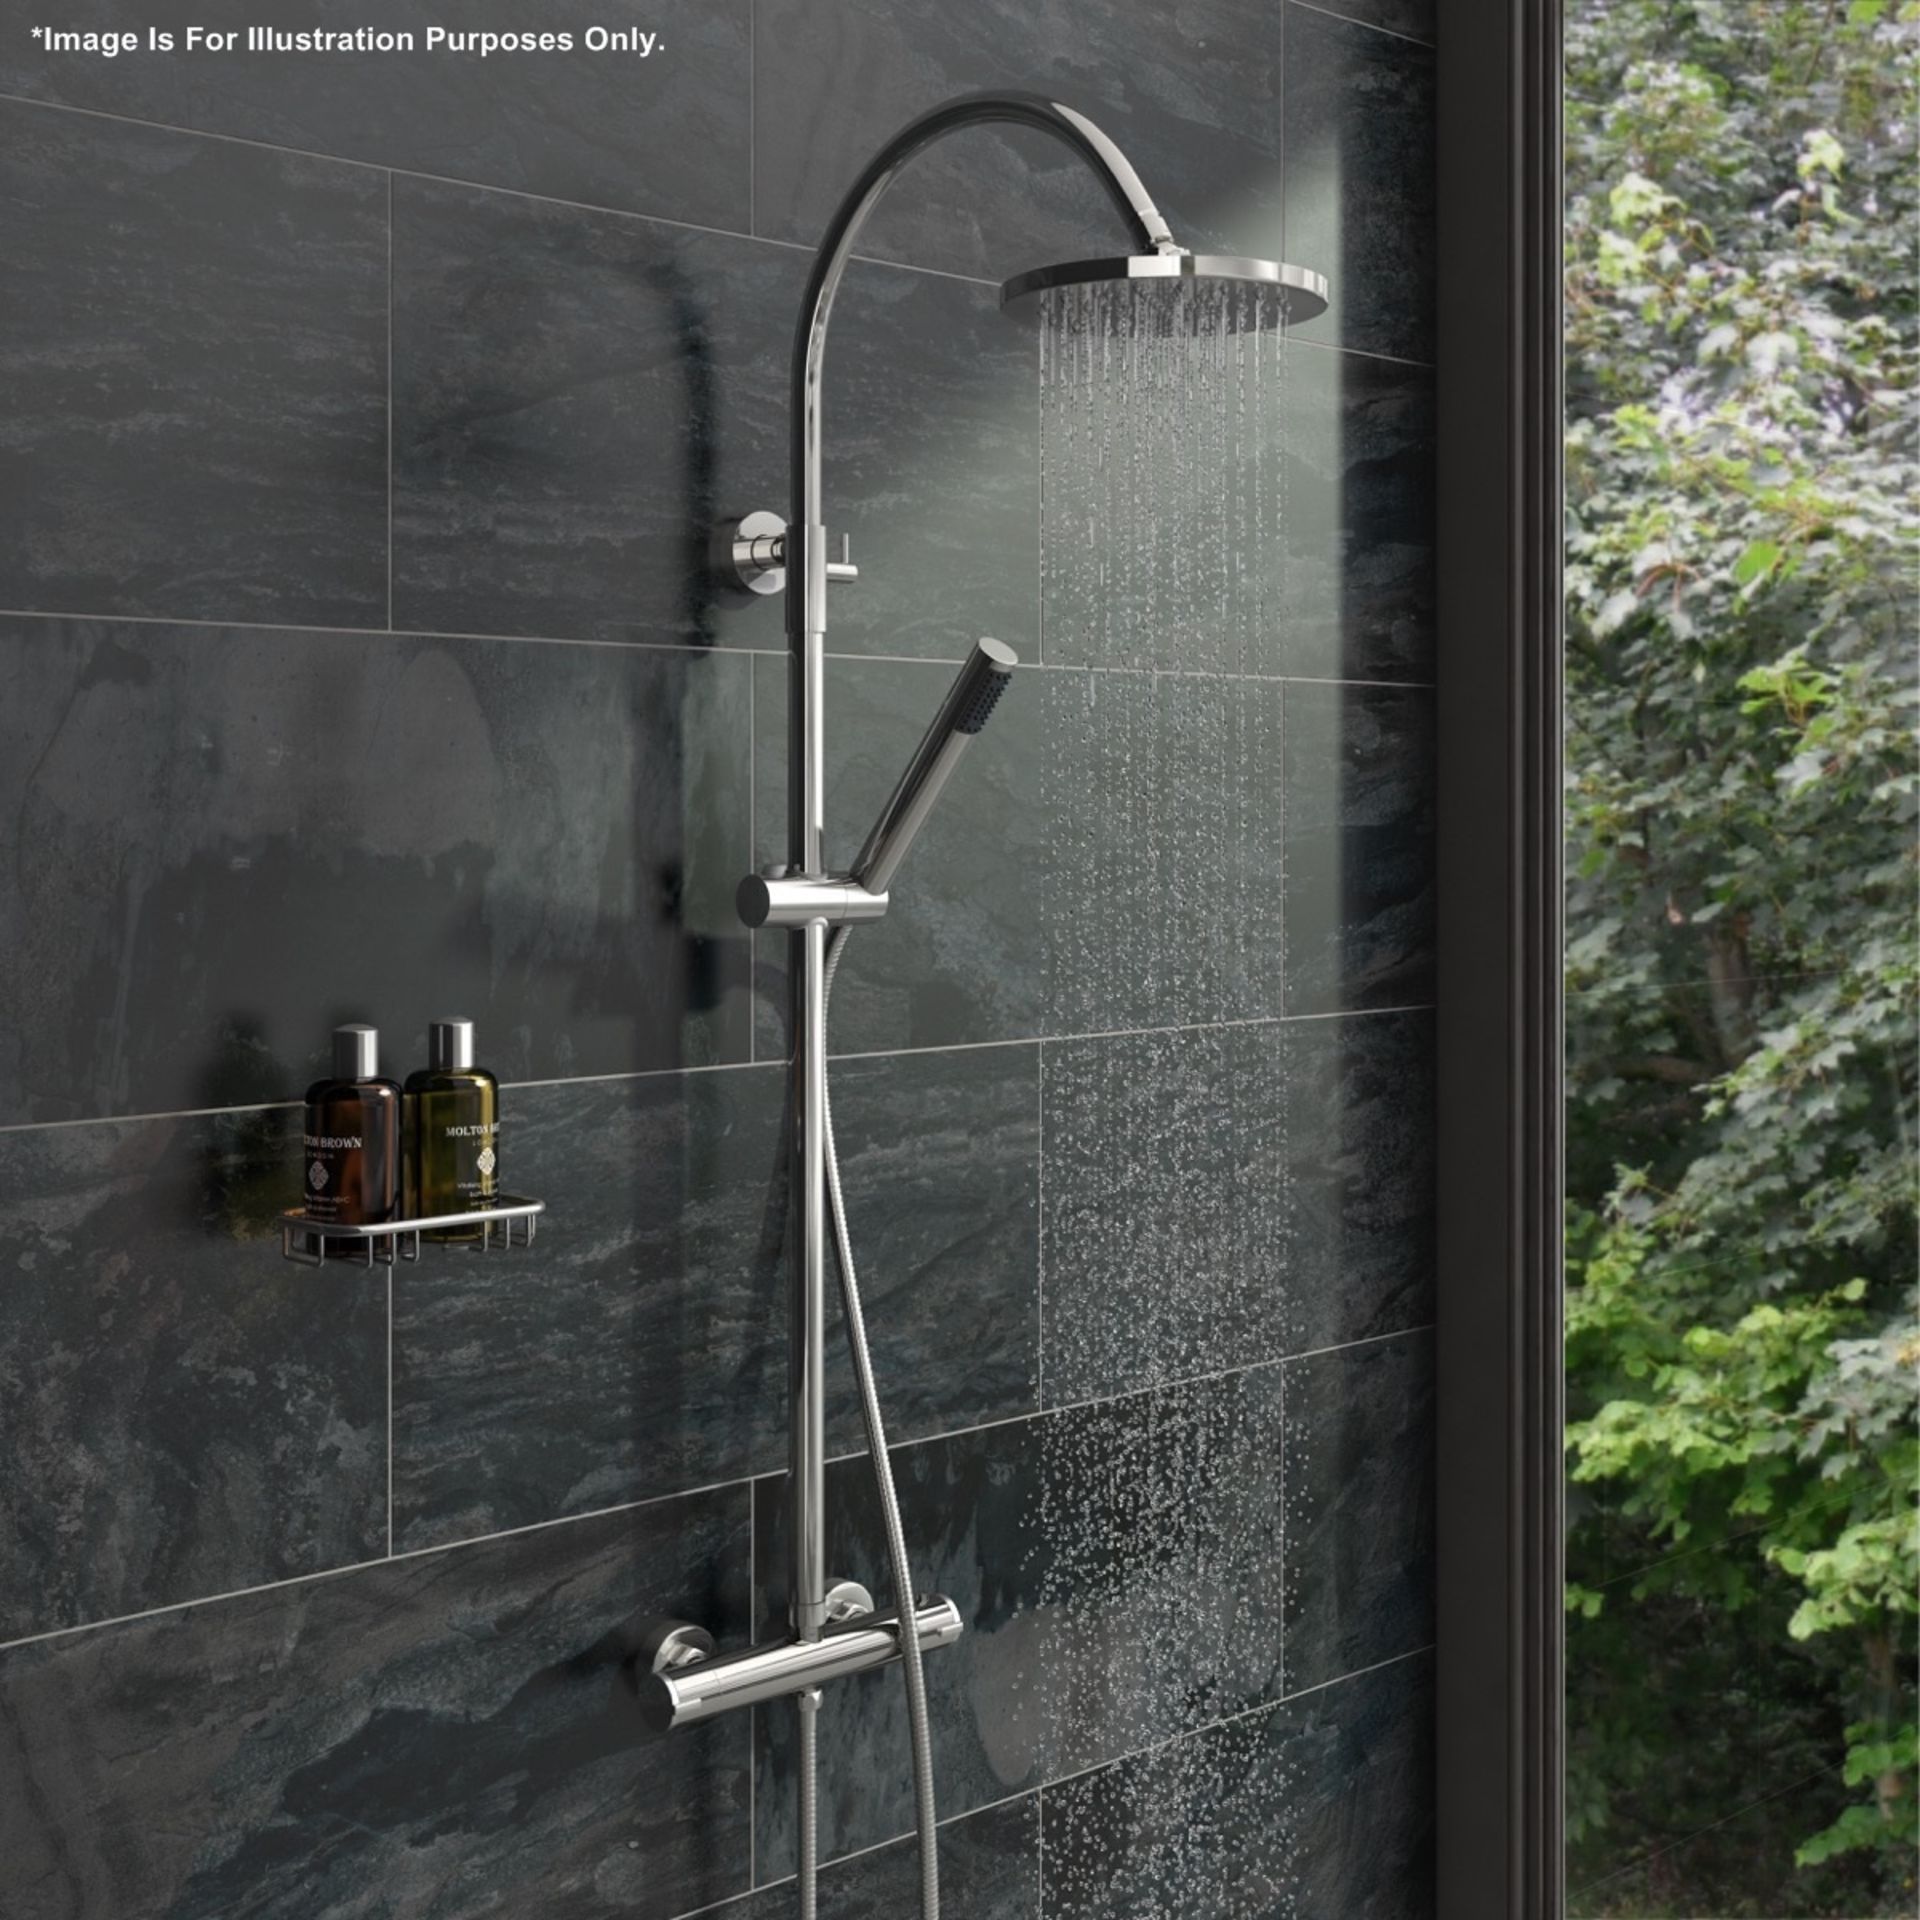 1 x ARIA Round Head Thermostatic Shower Kit - Chrome - CILISS4 - Ref: MBI027 - CL190 - Location: